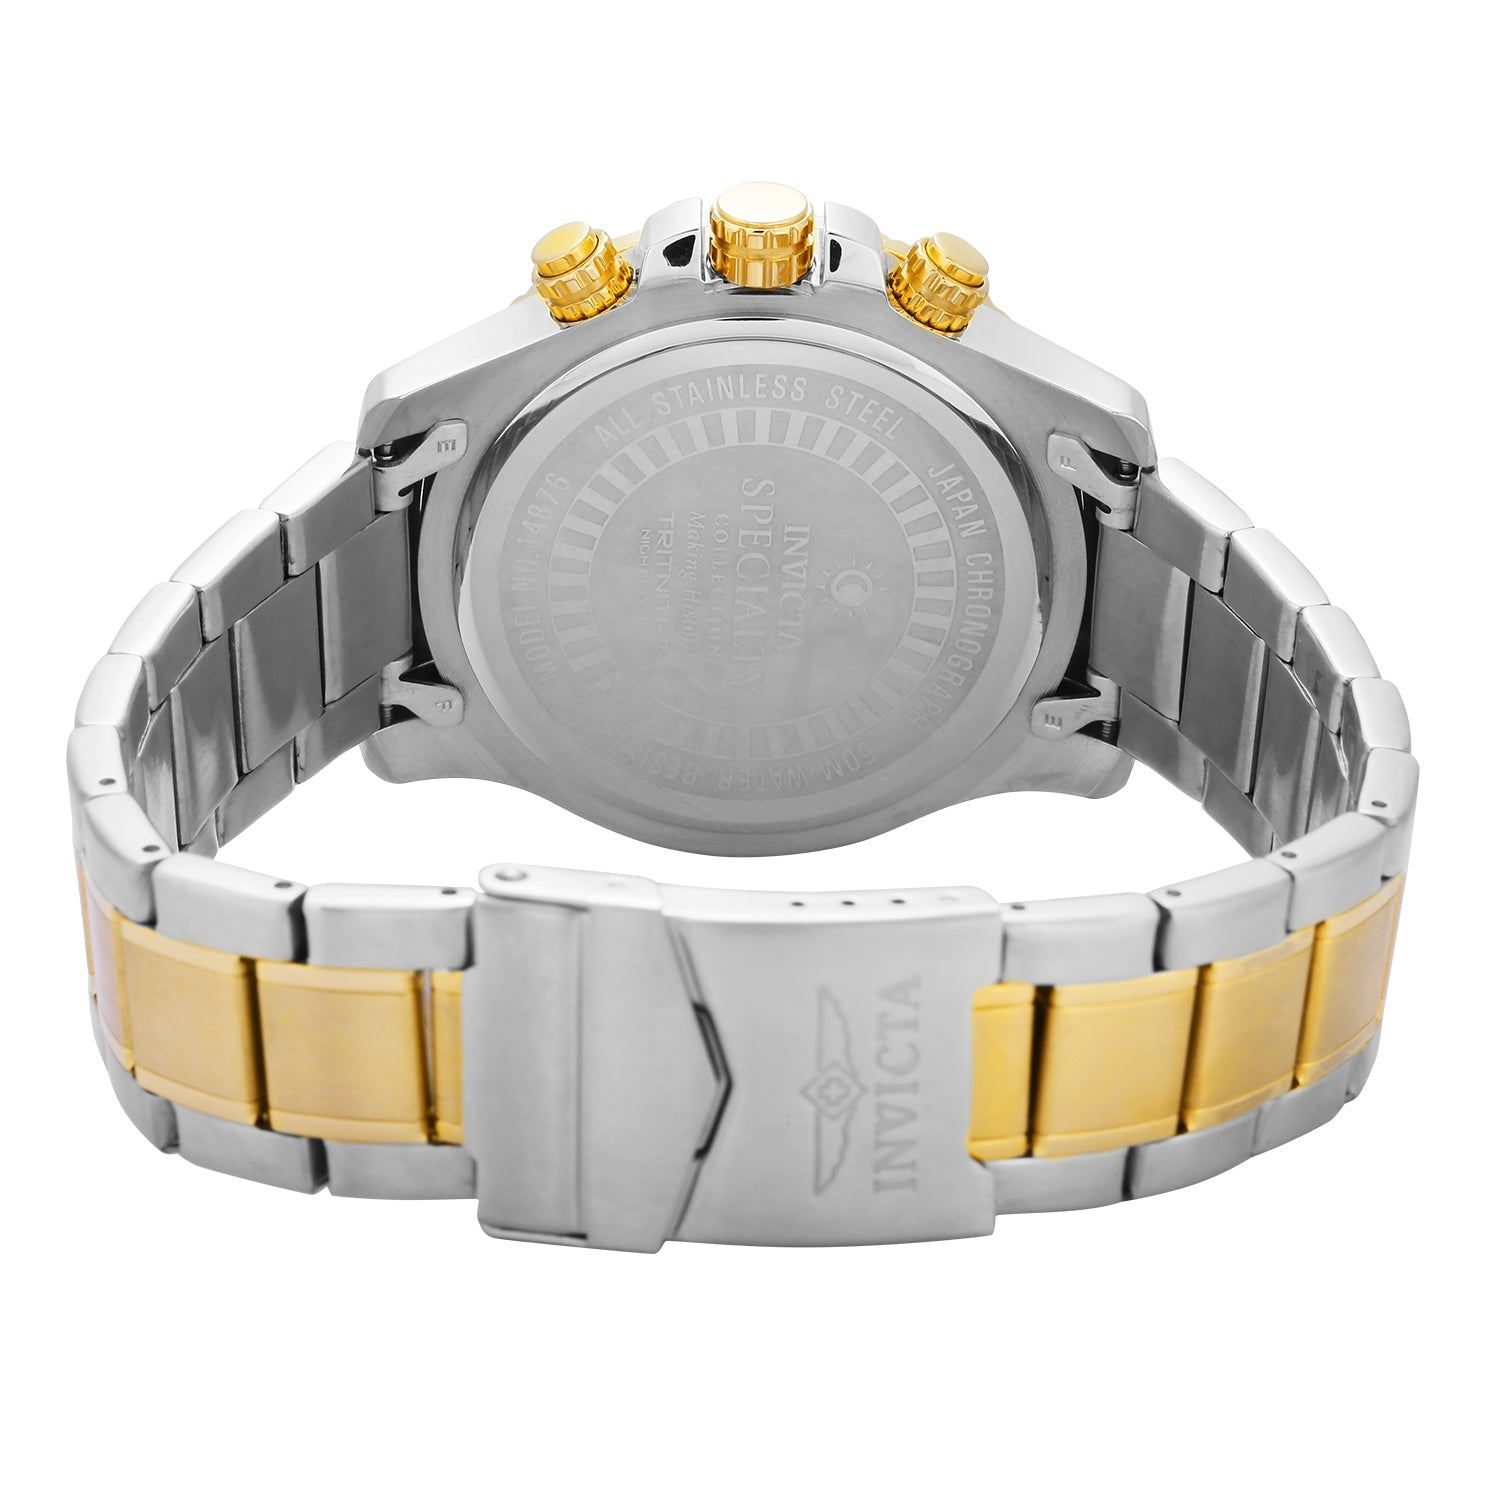 Back view of Invicta Specialty 14876 Men's Quartz Watch with silver and gold finish